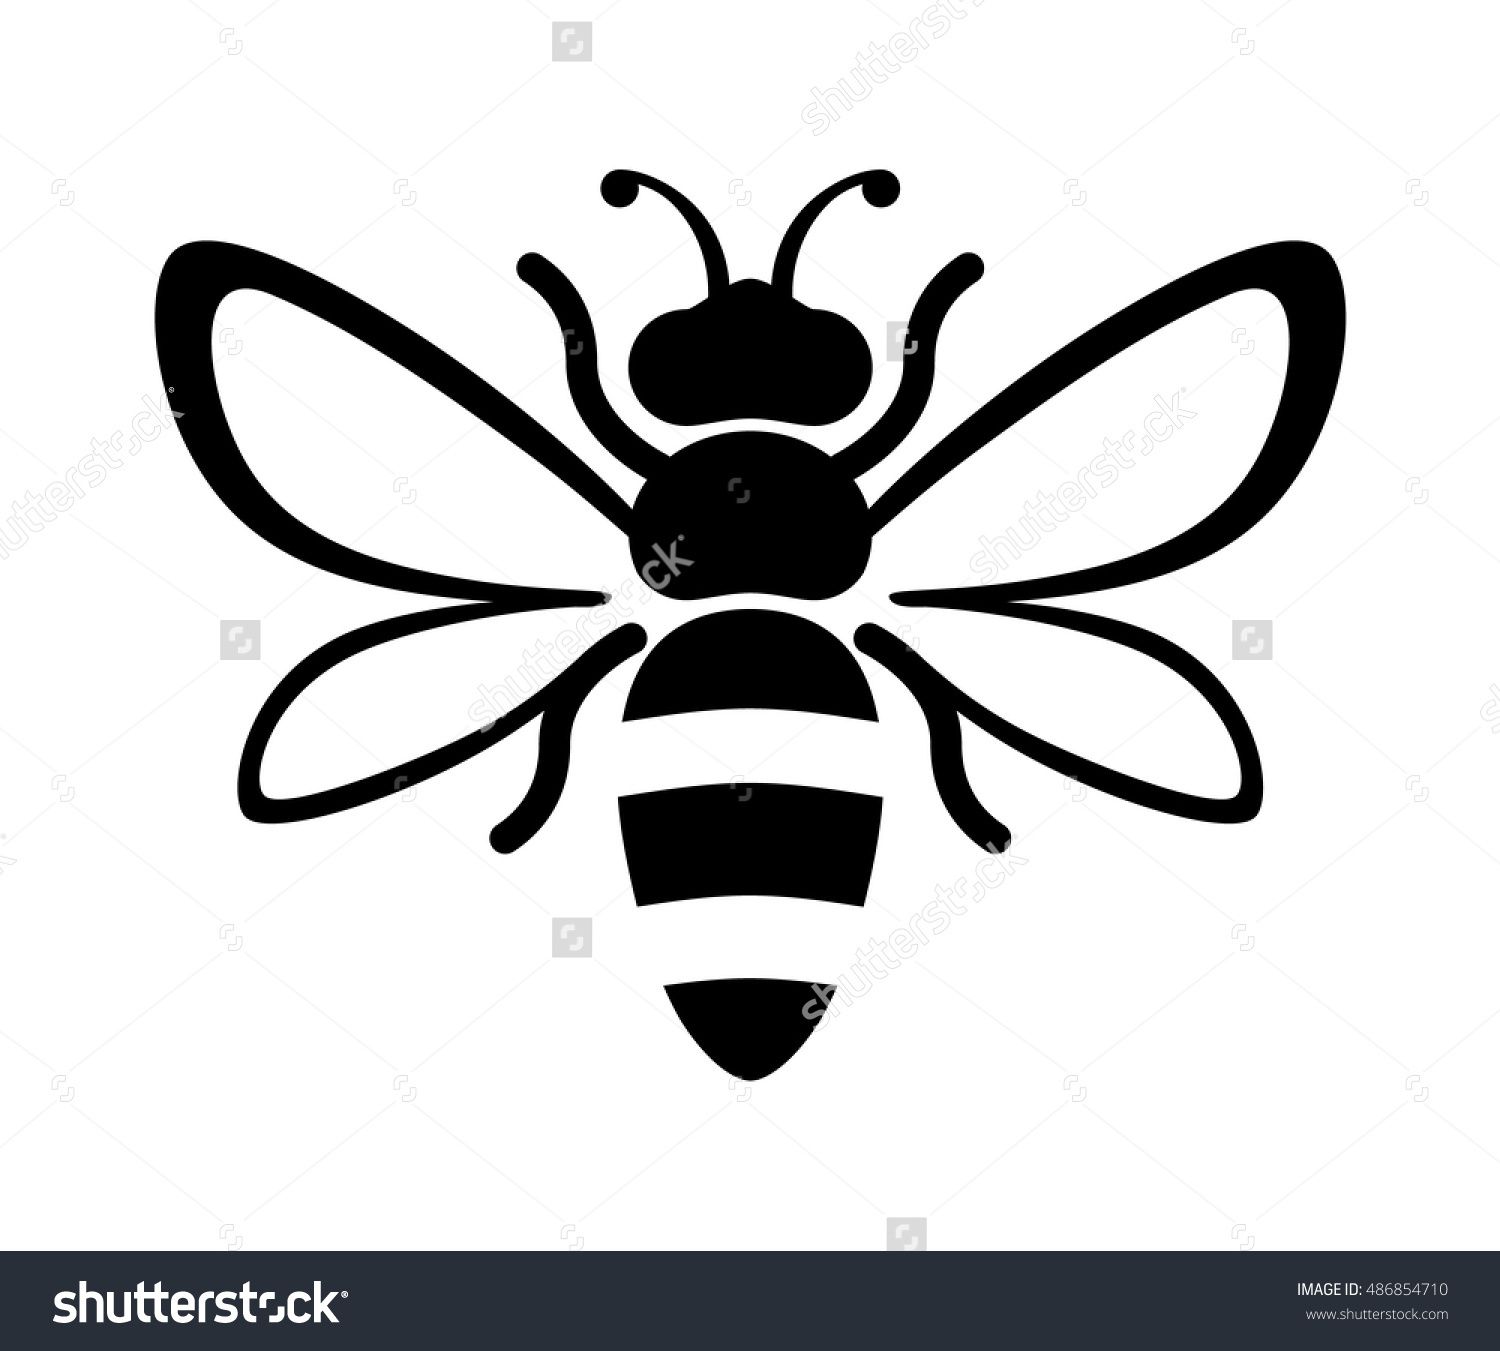 Graphic illustration of honey. Bees clipart silhouette